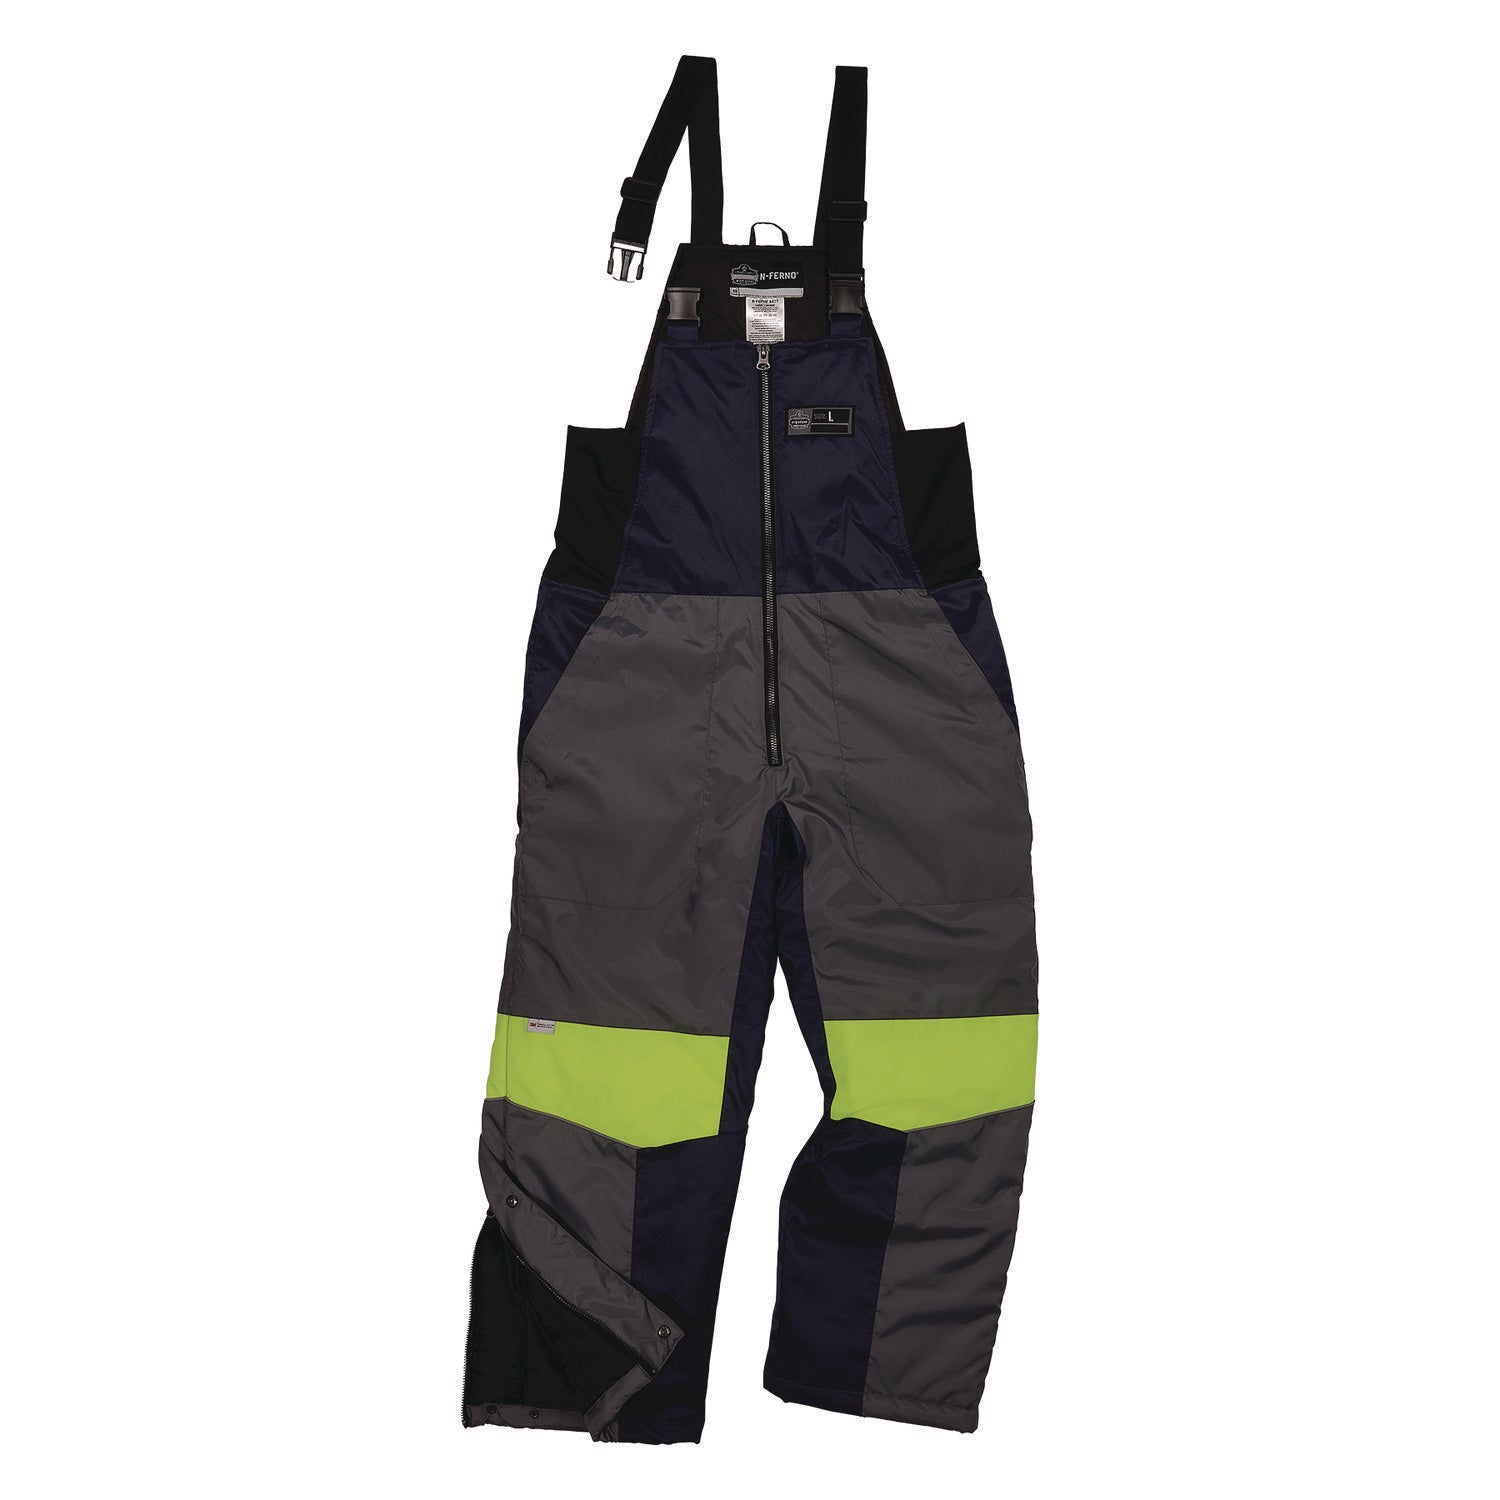 n-ferno-6477-insulated-cooler-bib-overall-2x-large-navy-ships-in-1-3-business-days_ego41266 - 1